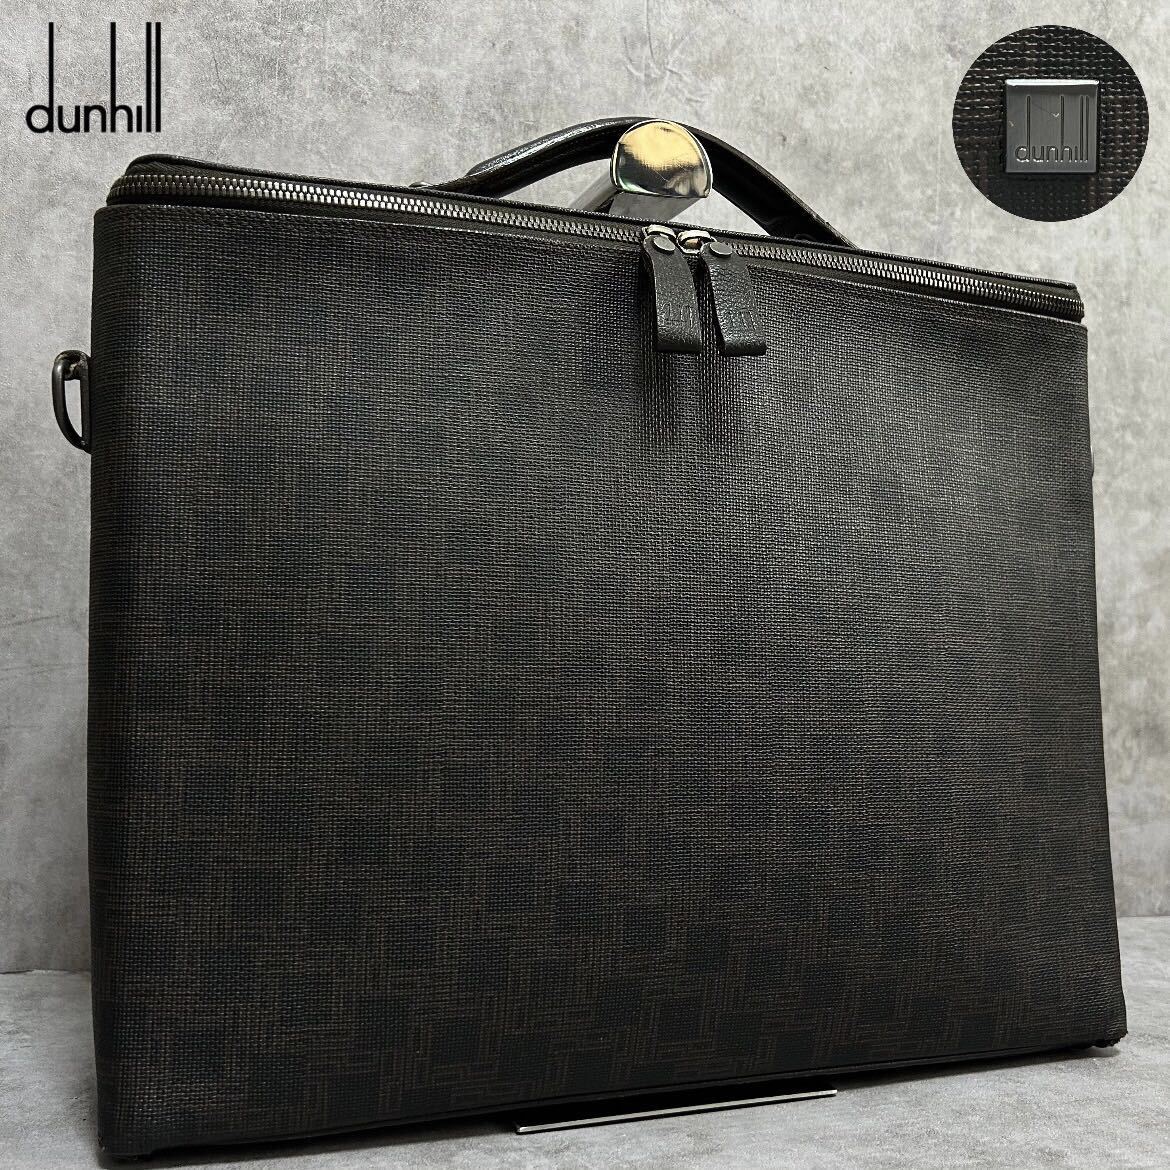  ultra rare / ultimate beautiful goods *dunhill Dunhill D8ti-eito business bag briefcase 4.A4 storage independent PVC leather original leather dark brown commuting 